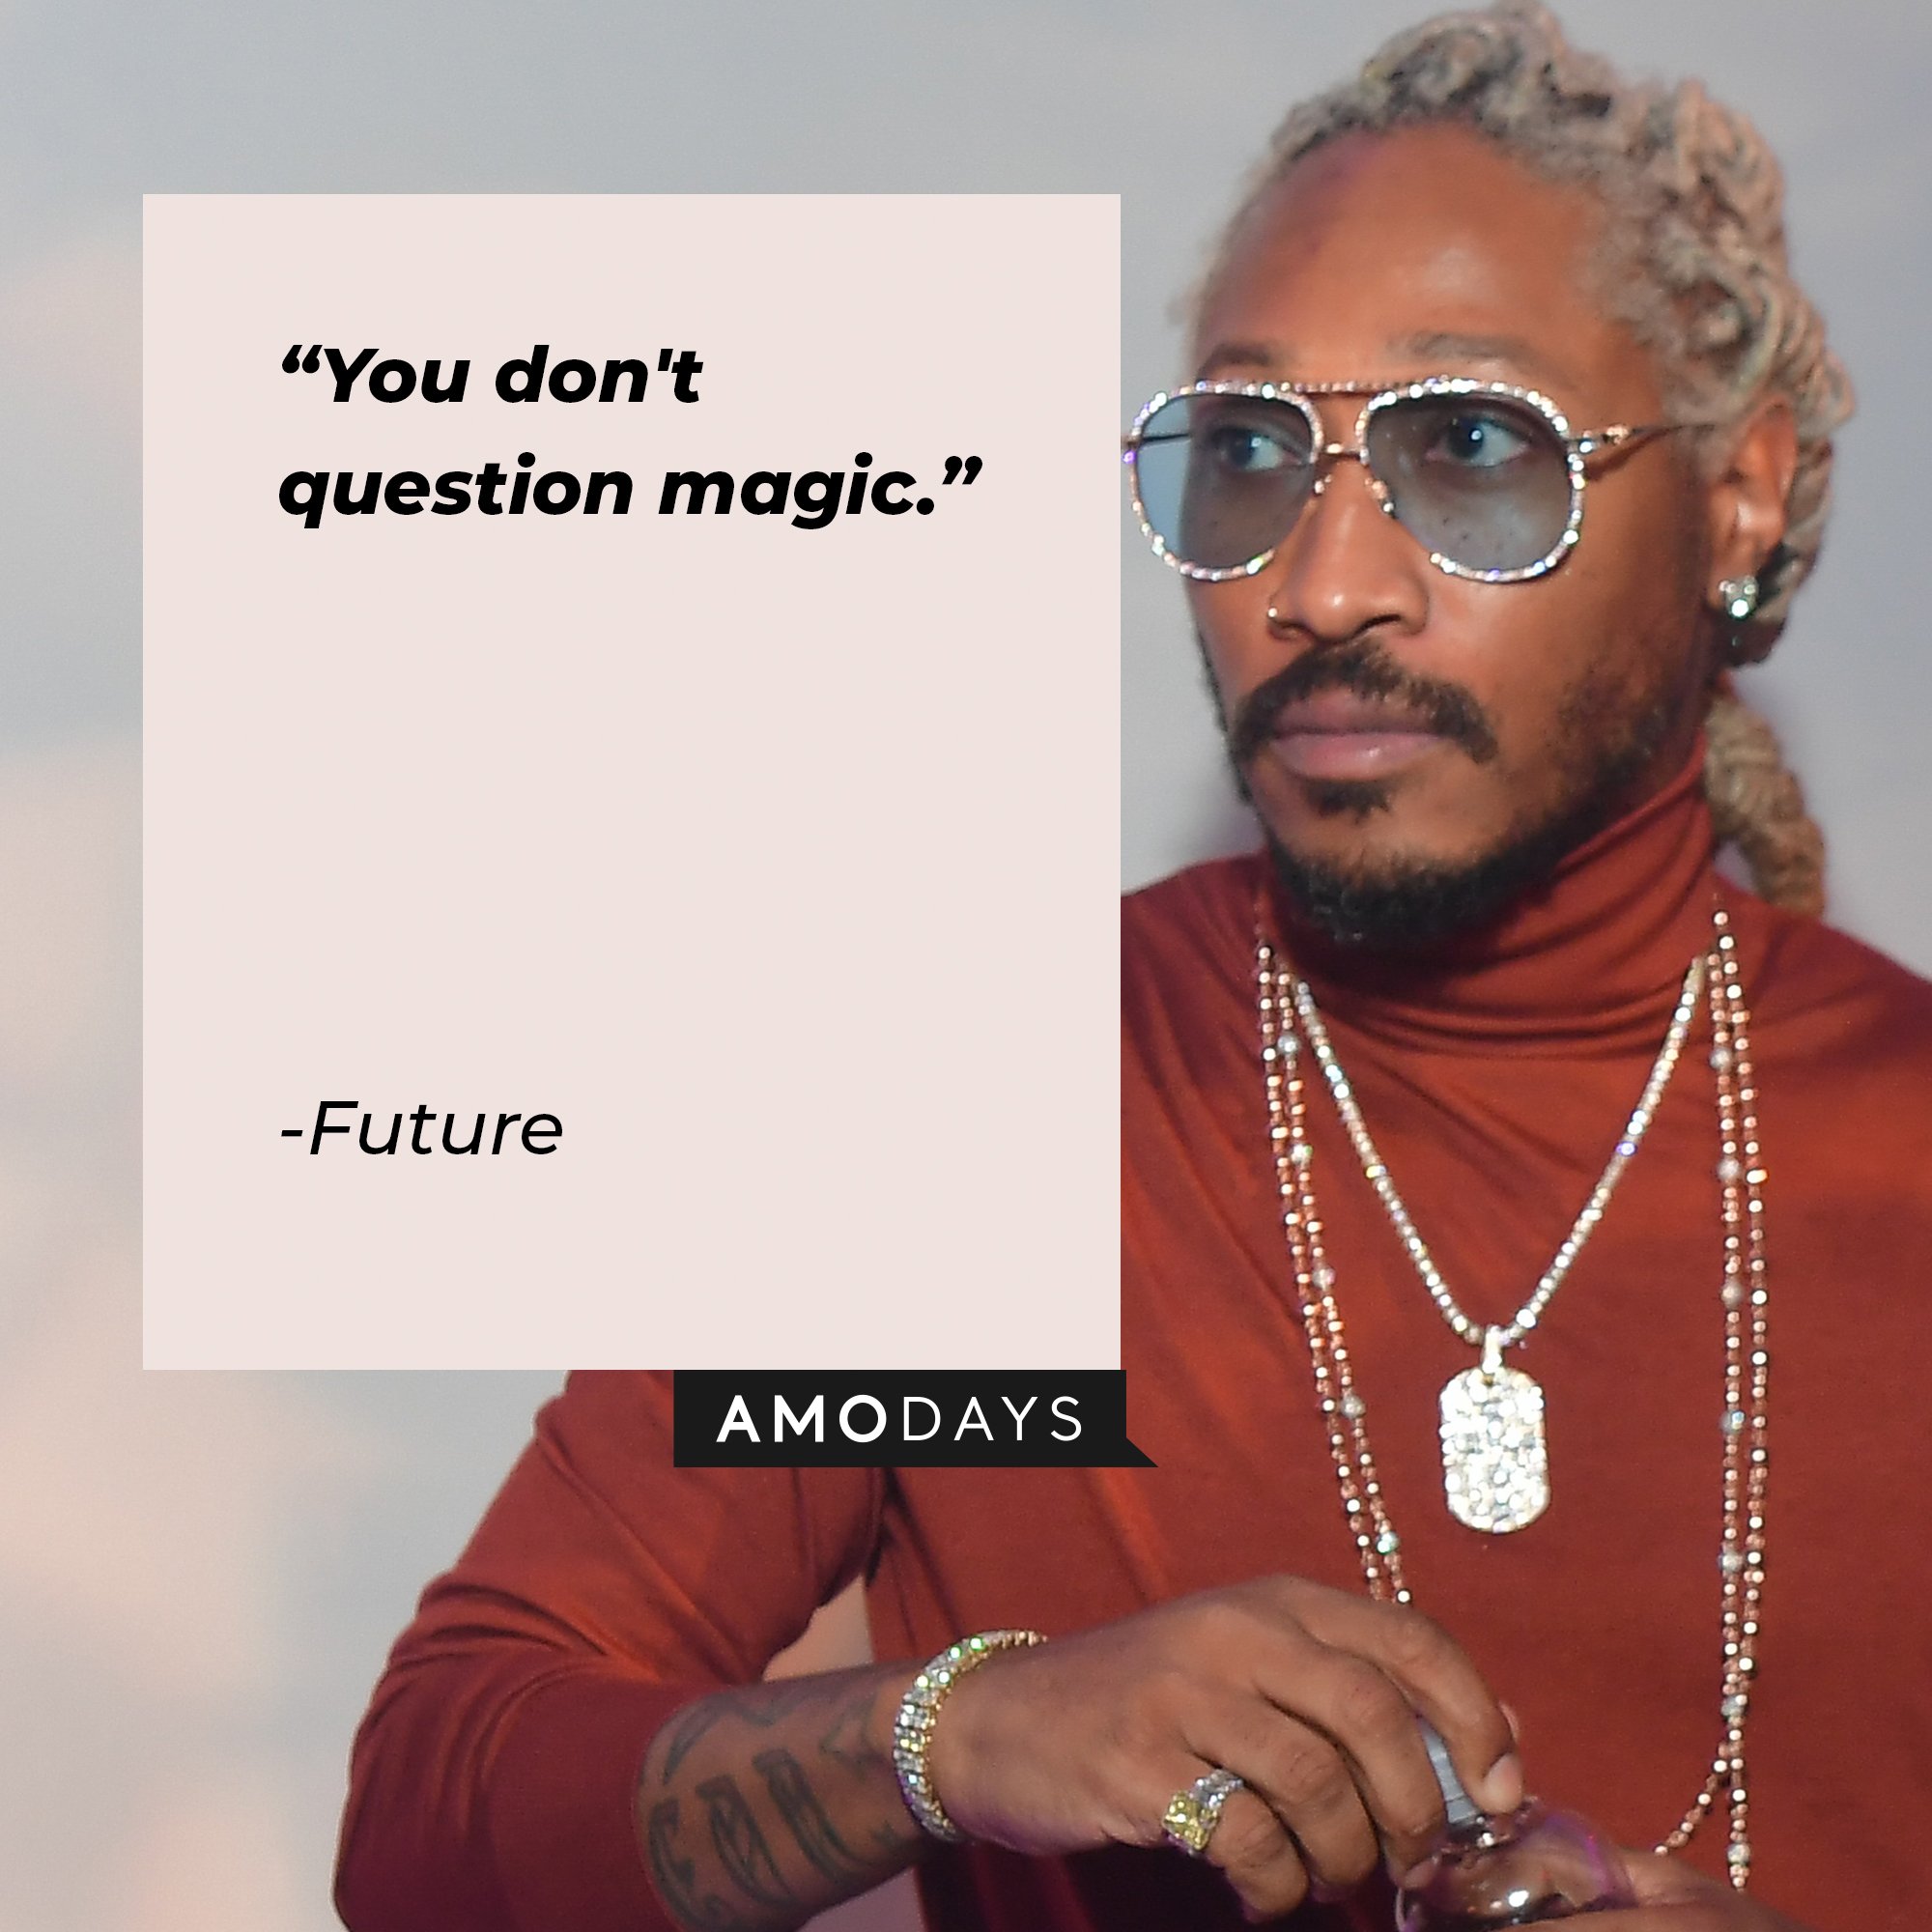 Future’s quote: "You don't question magic." | Image: AmoDays 